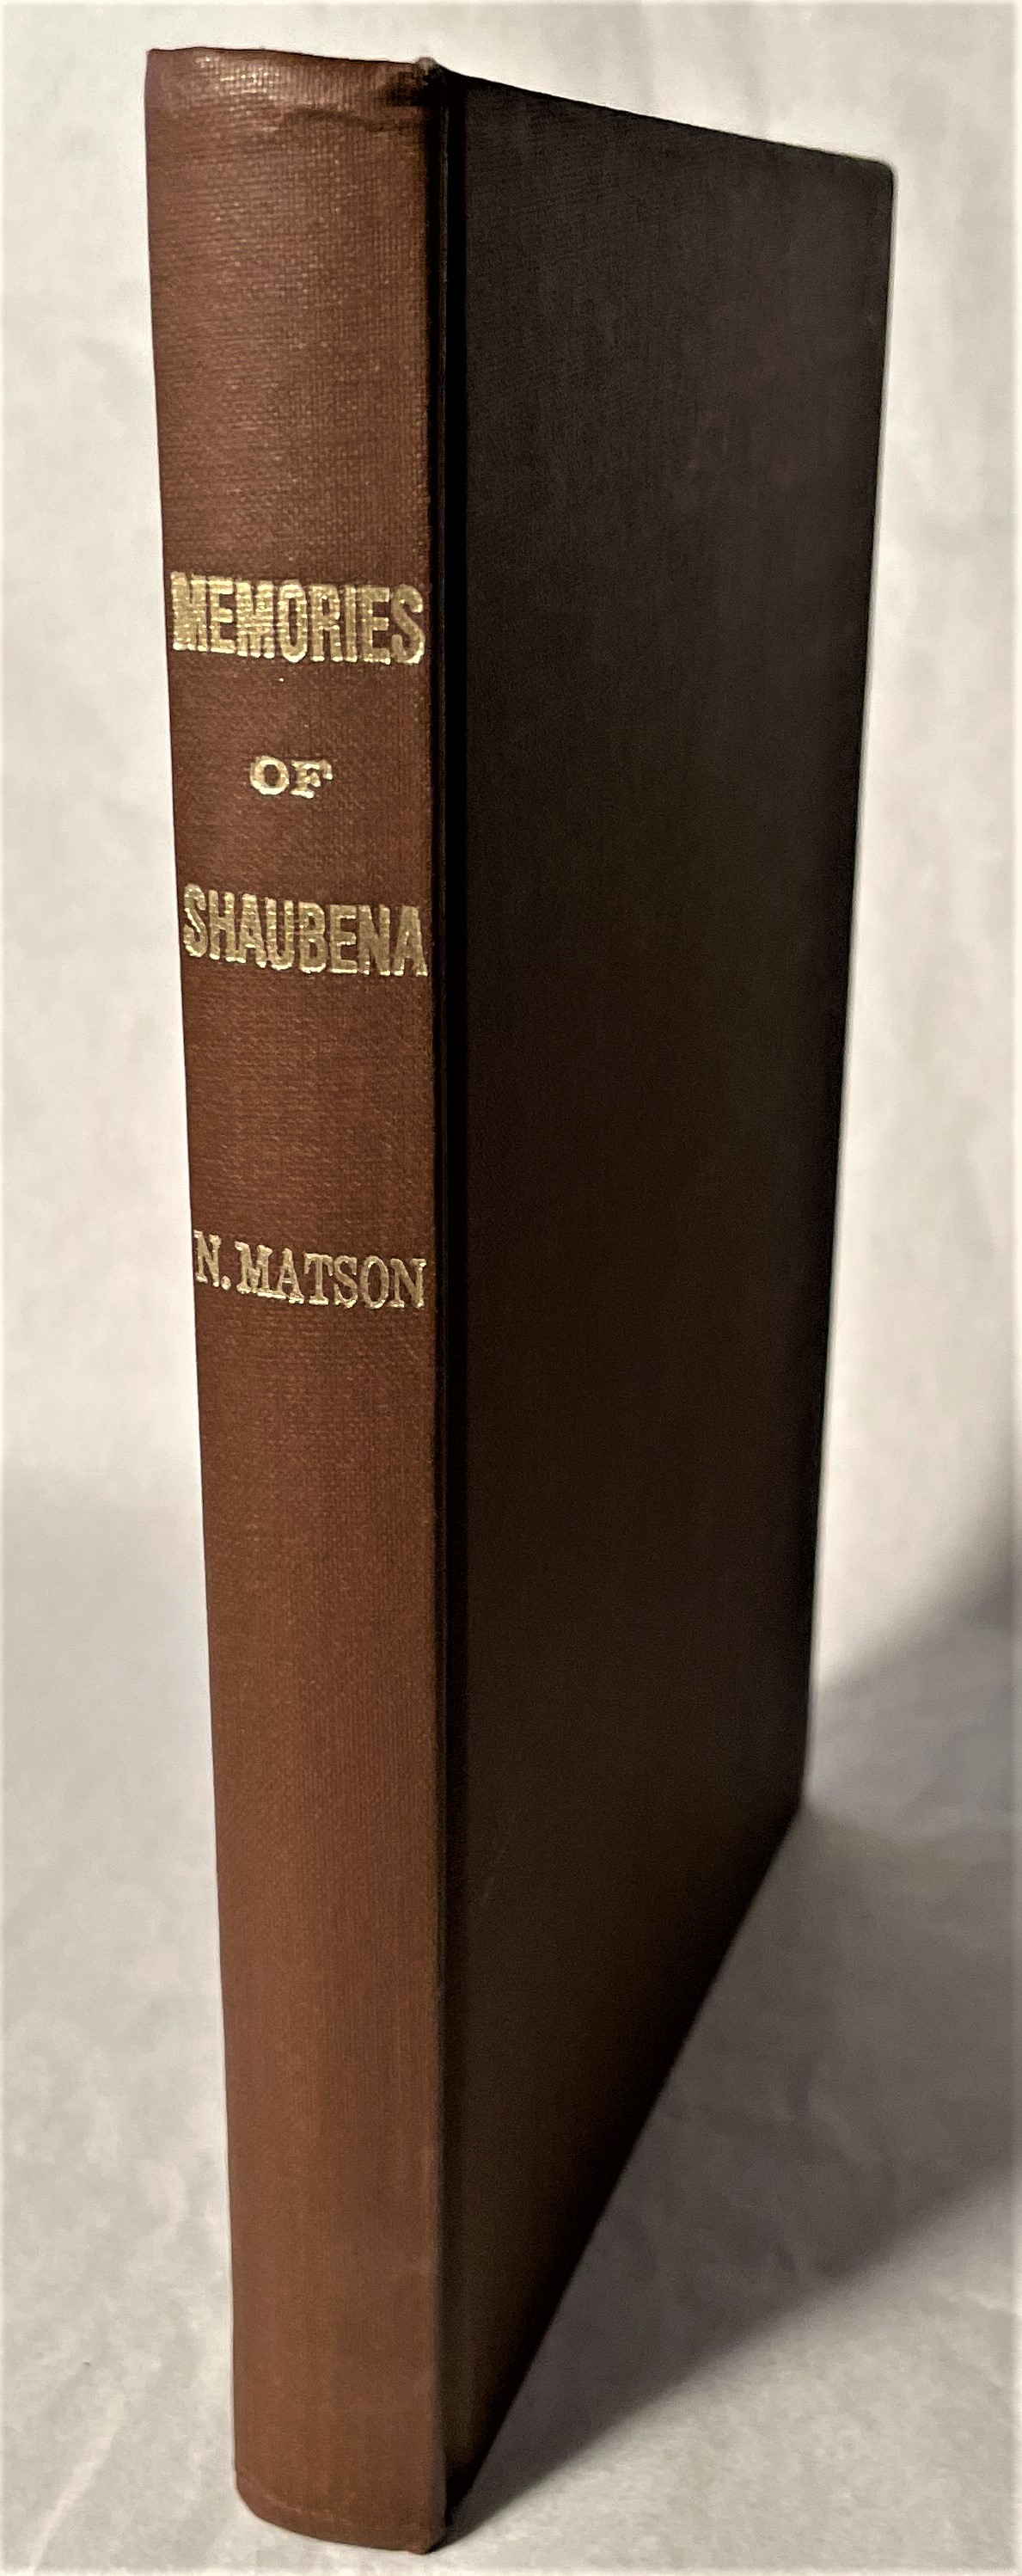 MATSON, N. - Memories of Shaubena: Incidents Relating to the Early Settlement of the West